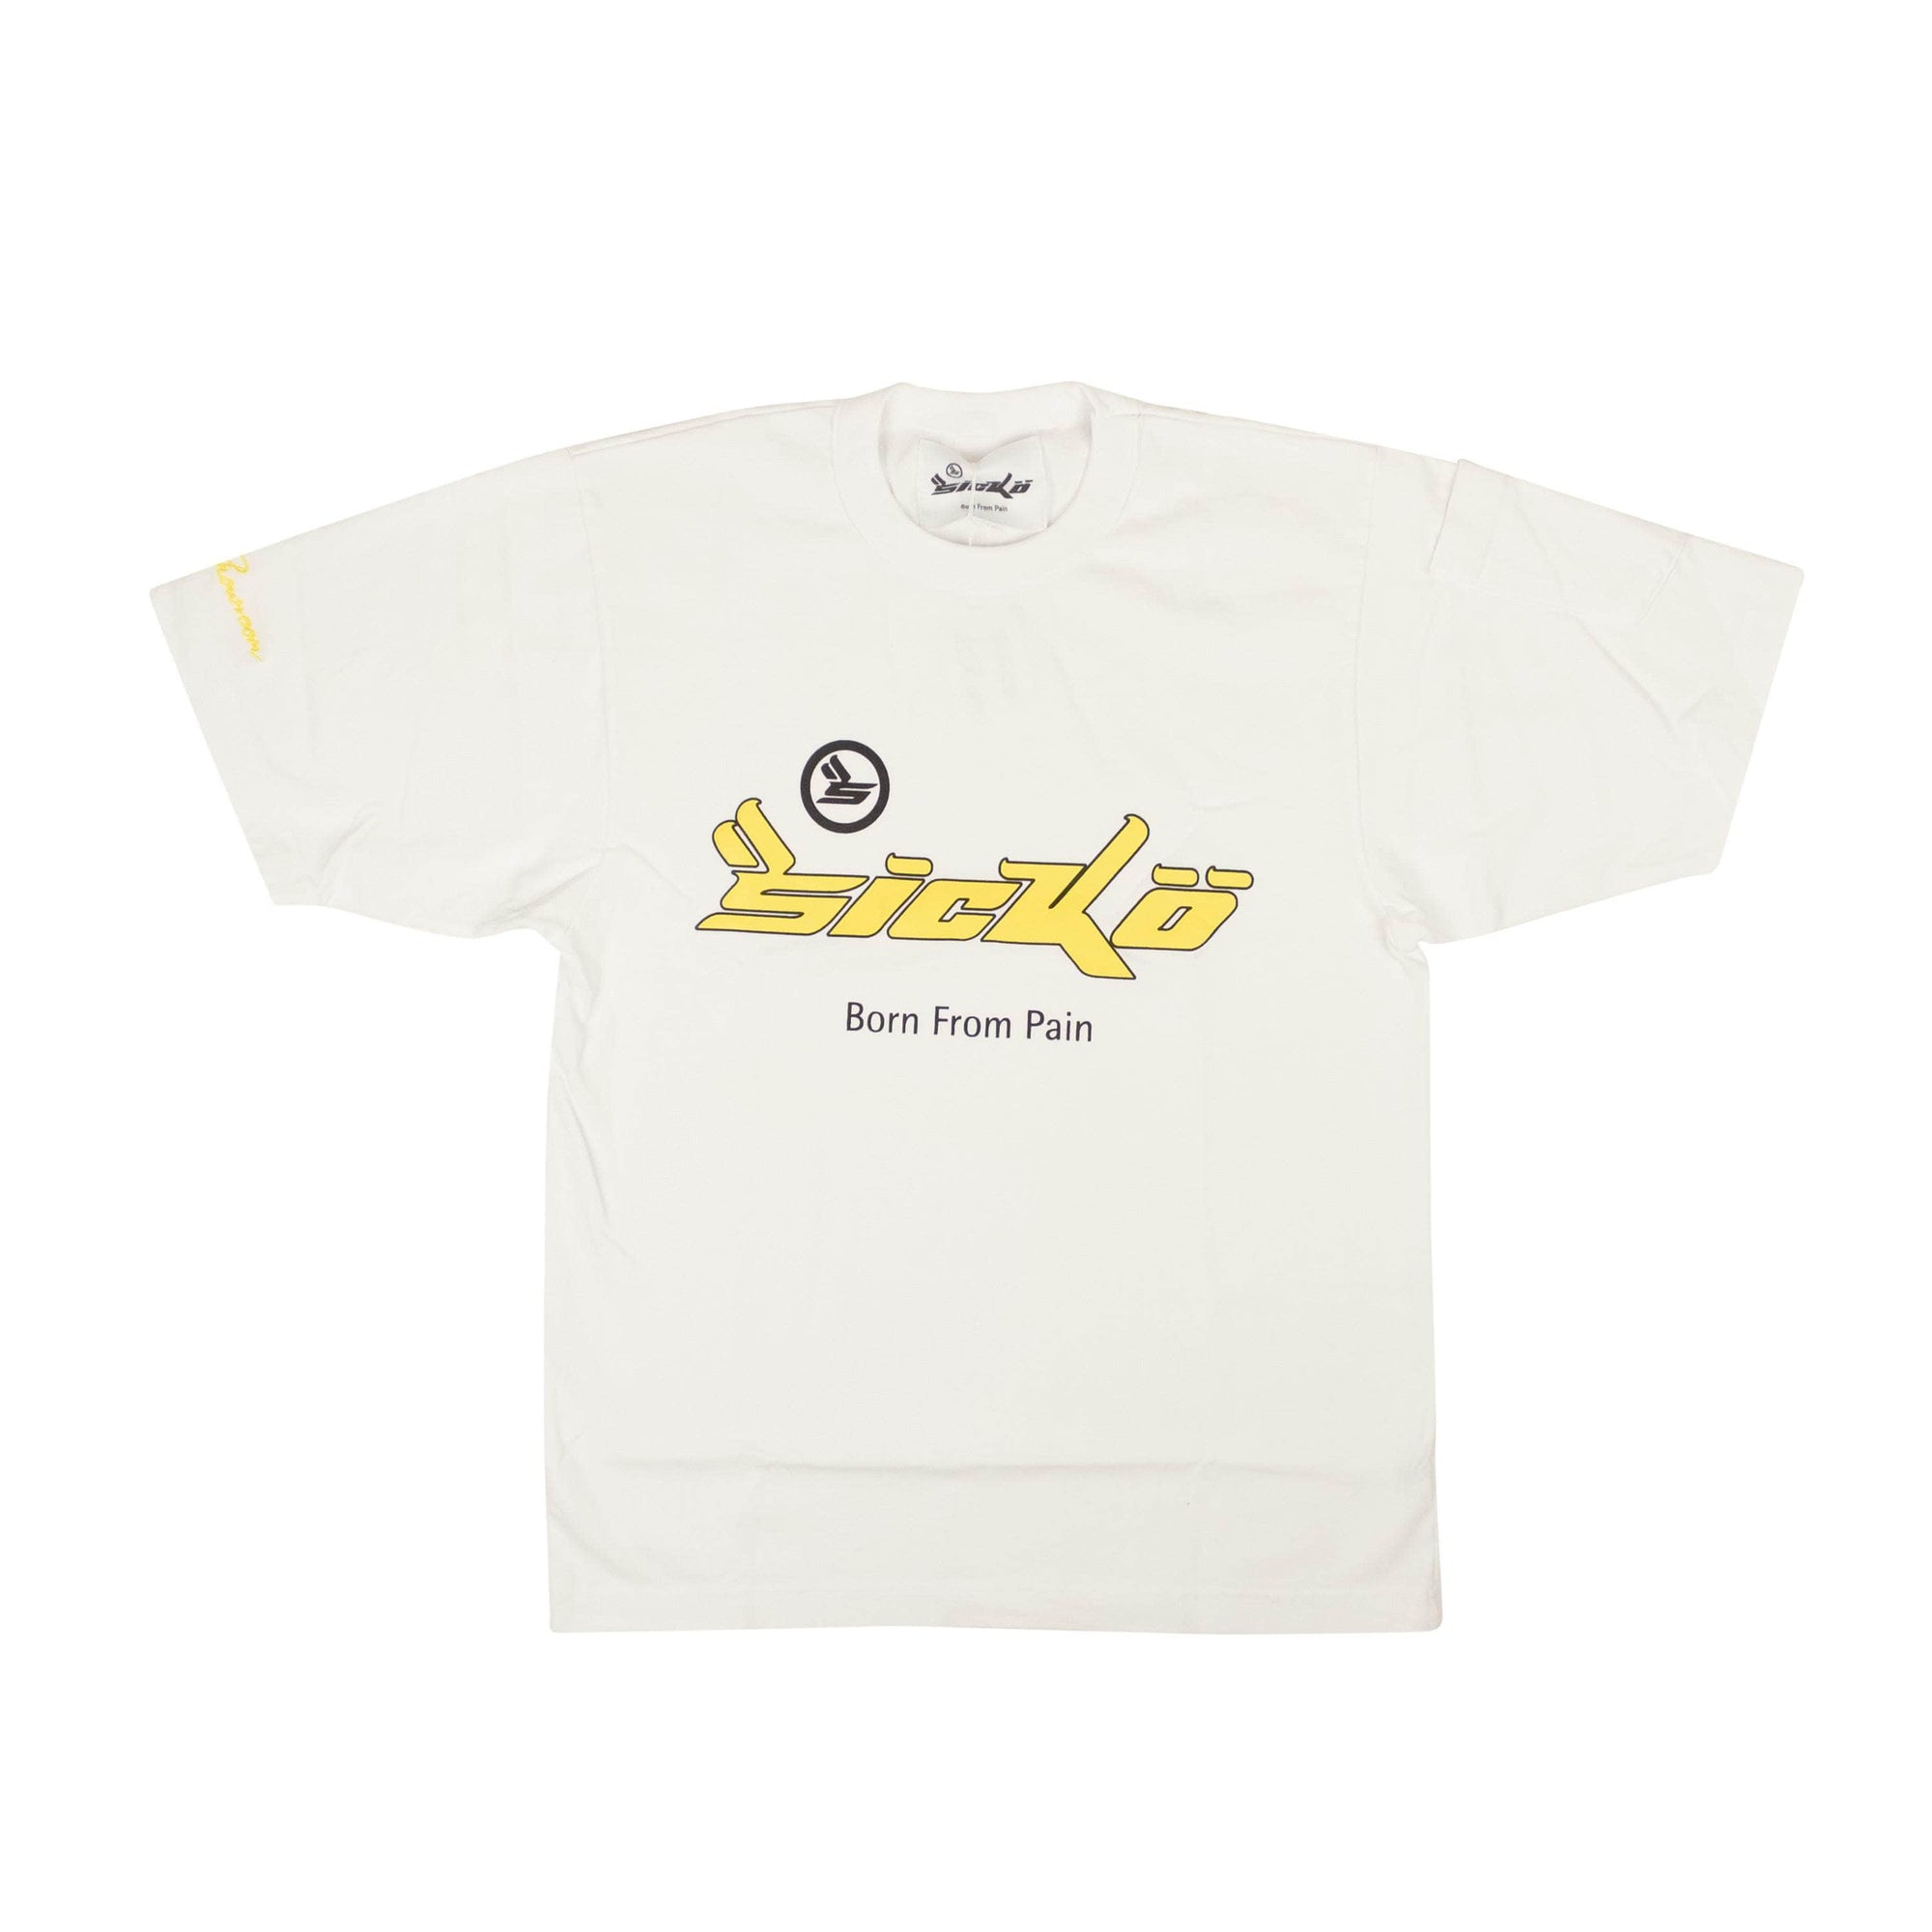 Sicko x 375 channelenable-all, chicmi, couponcollection, gender-mens, main-clothing, shop375 S White And Yellow Logo Short Sleeve T-Shirt 95-SKO-1013/S 95-SKO-1013/S